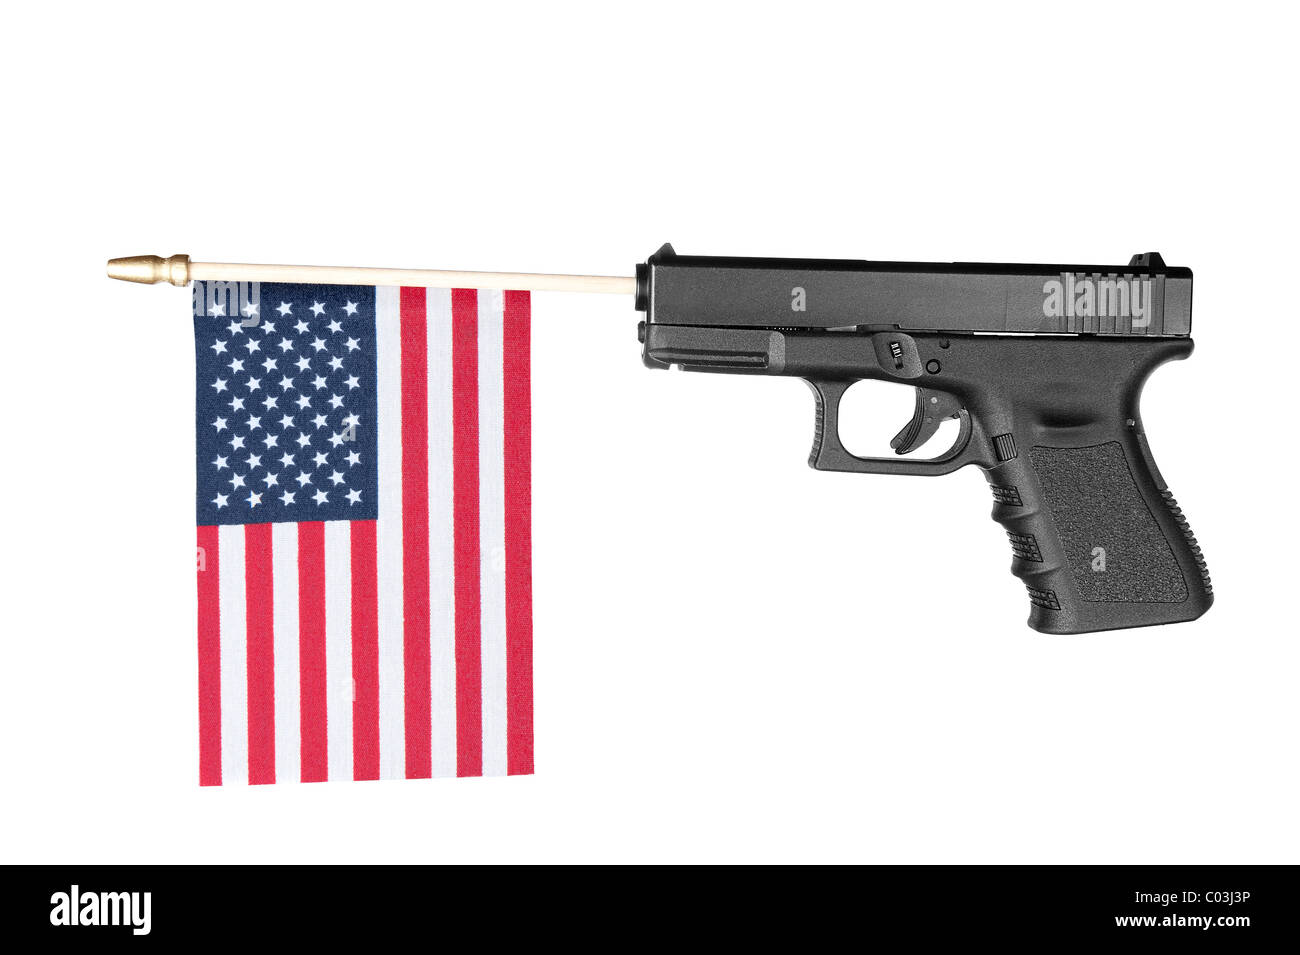 A pistol shoots out a flag. Isolated on white. Stock Photo